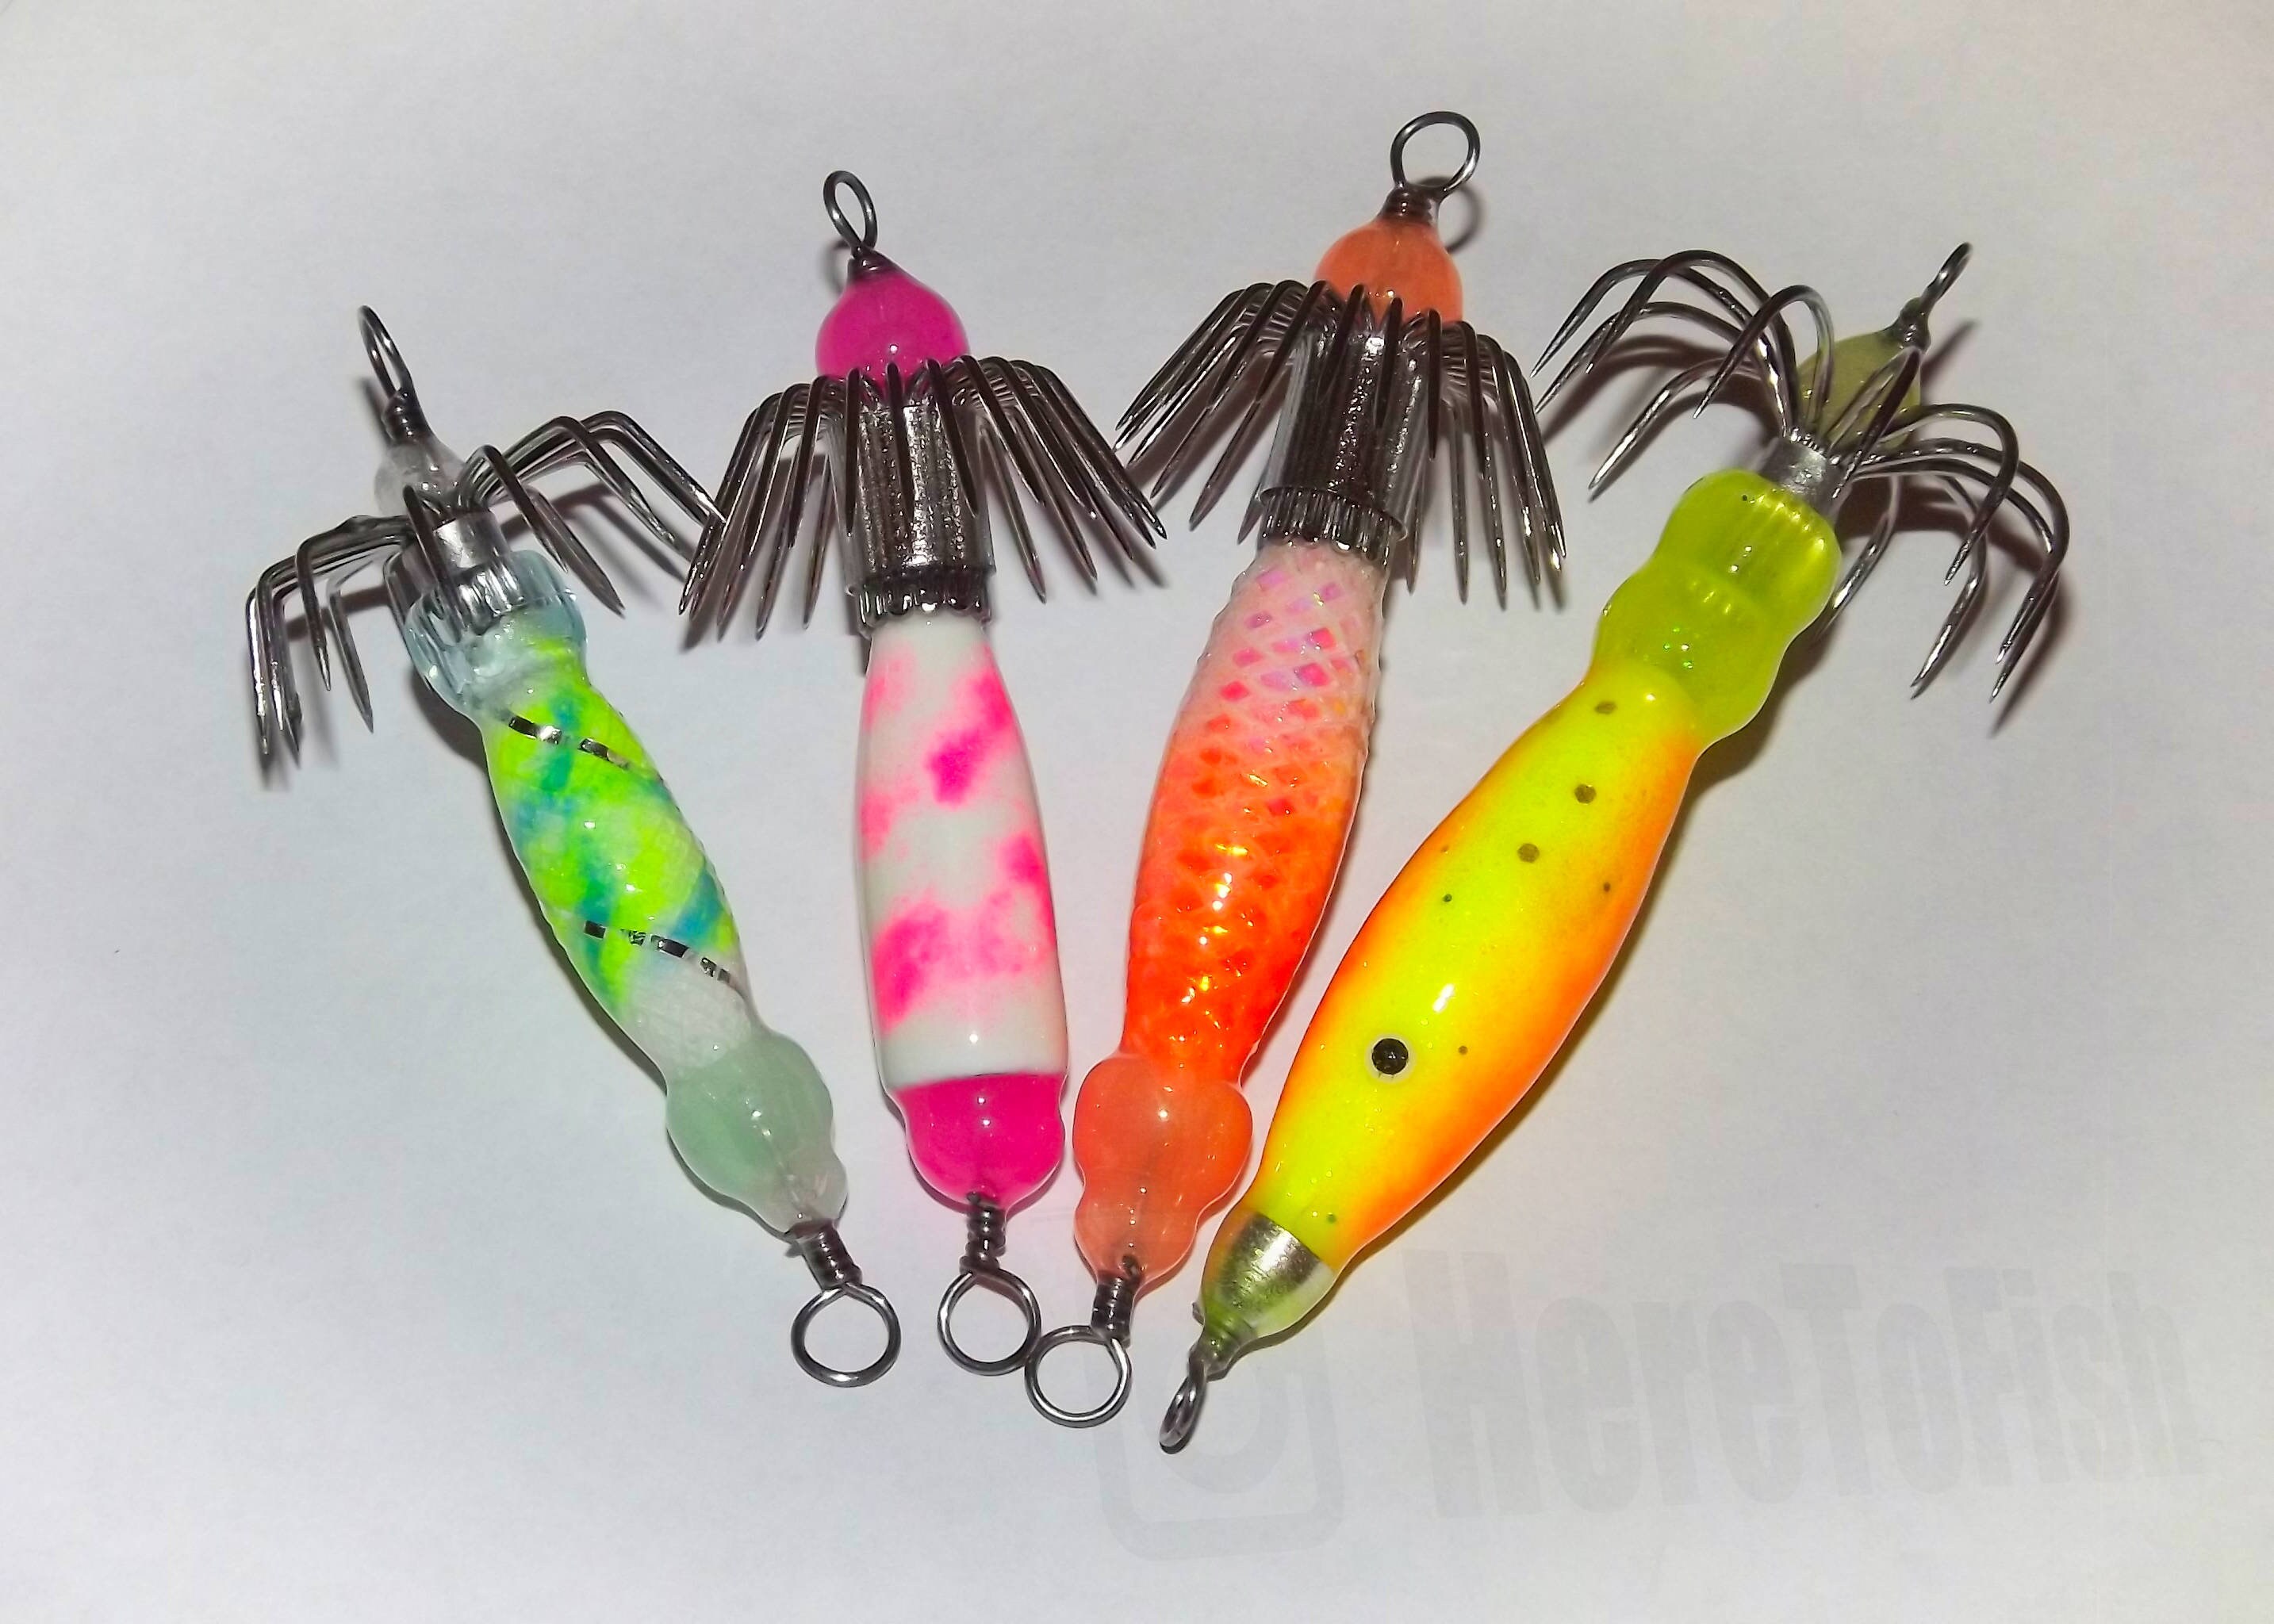 squid jigs fishing glow in the dark jig puget sound 4pcs high quality 